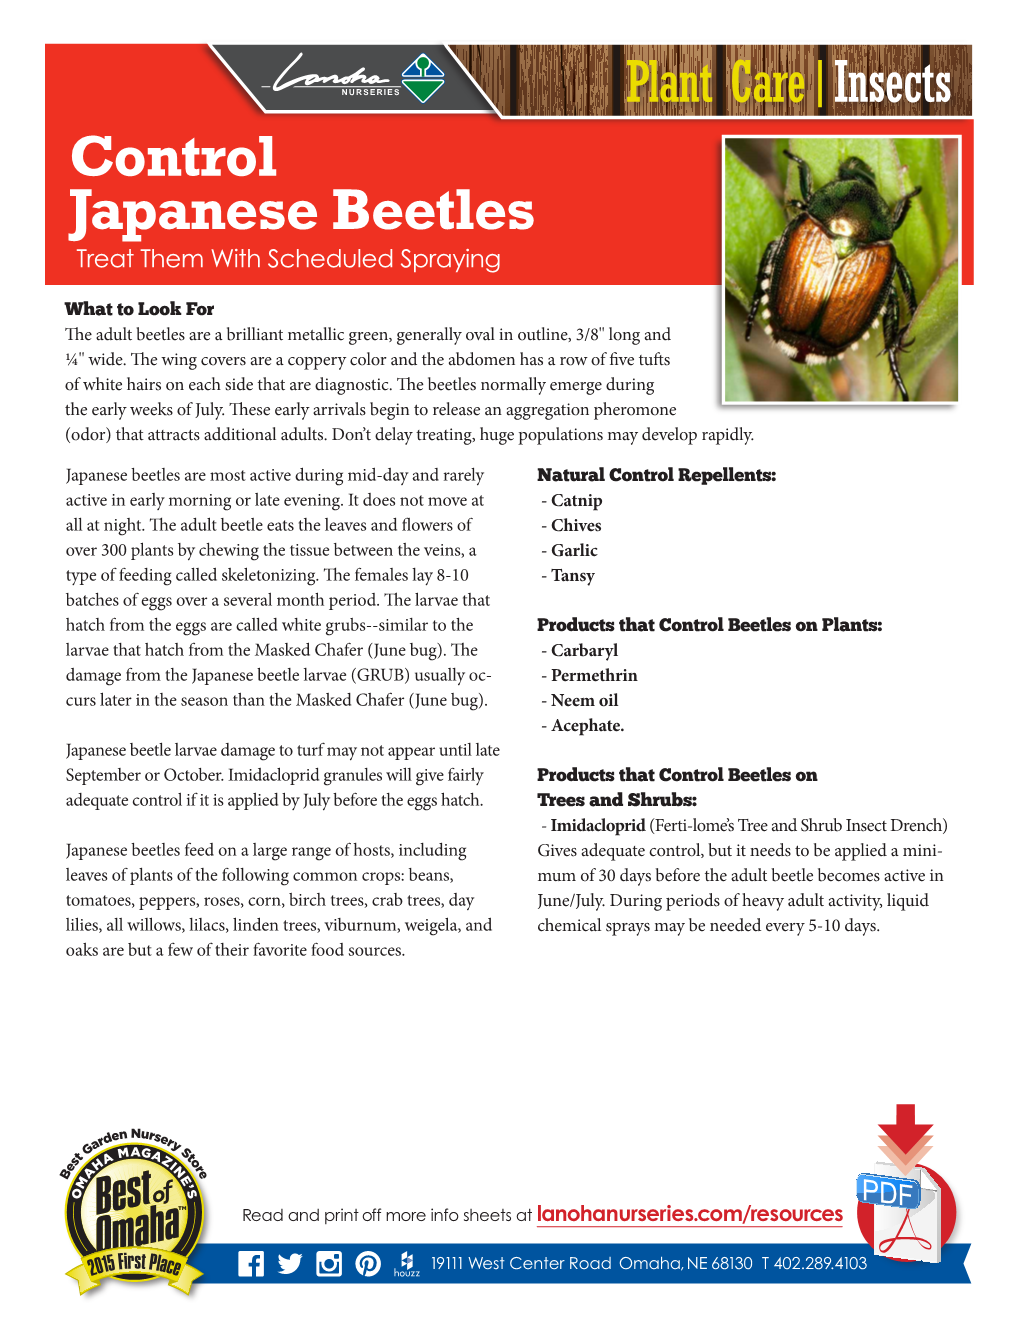 Control Japanese Beetles Treat Them with Scheduled Spraying